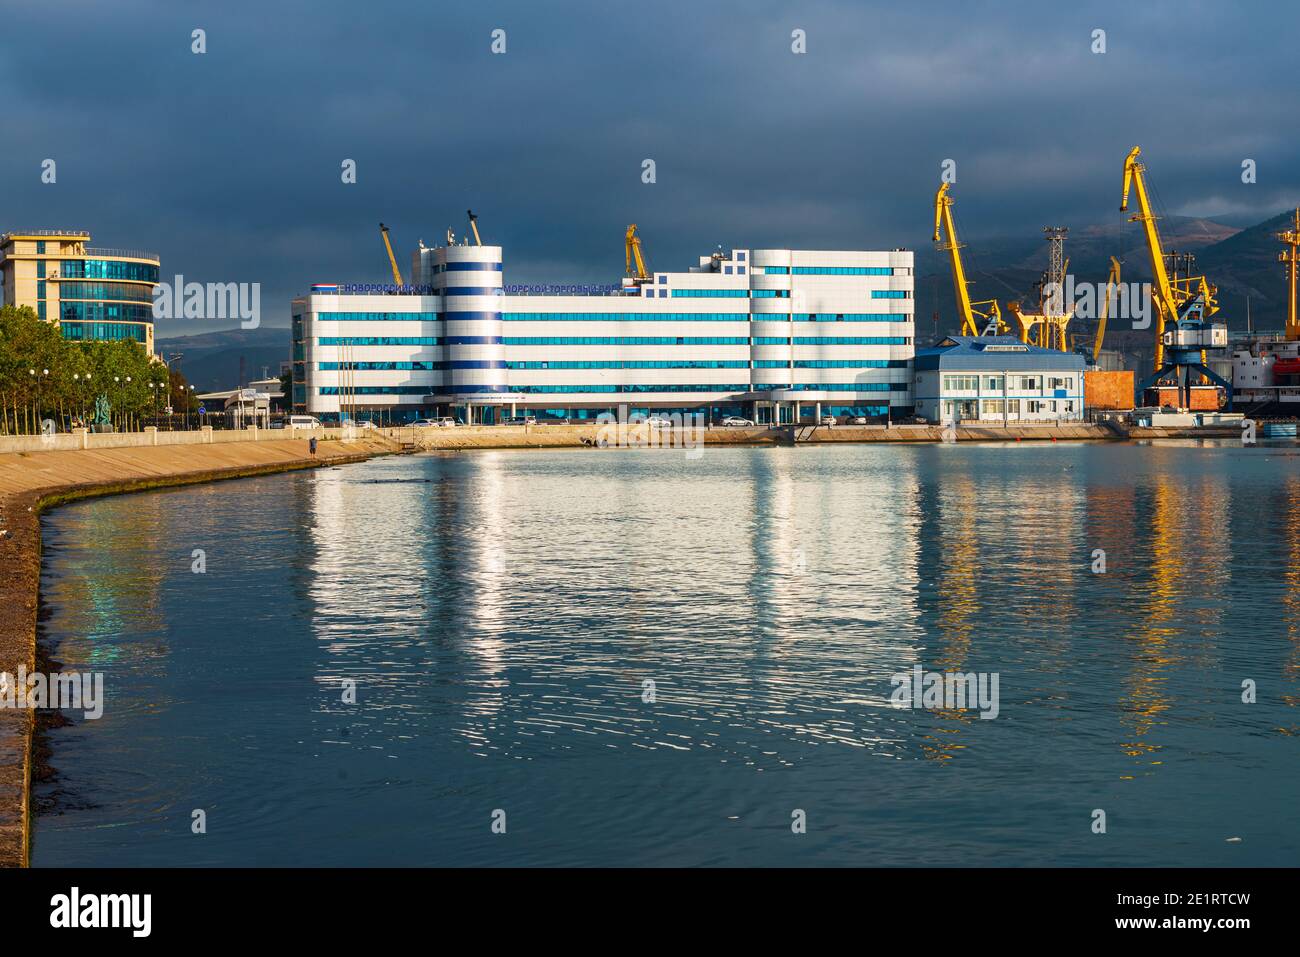 view of the administrative building of the novorossiysk commercial sea port, port facilities and mechanisms, thick fog descends from the mountains Stock Photo